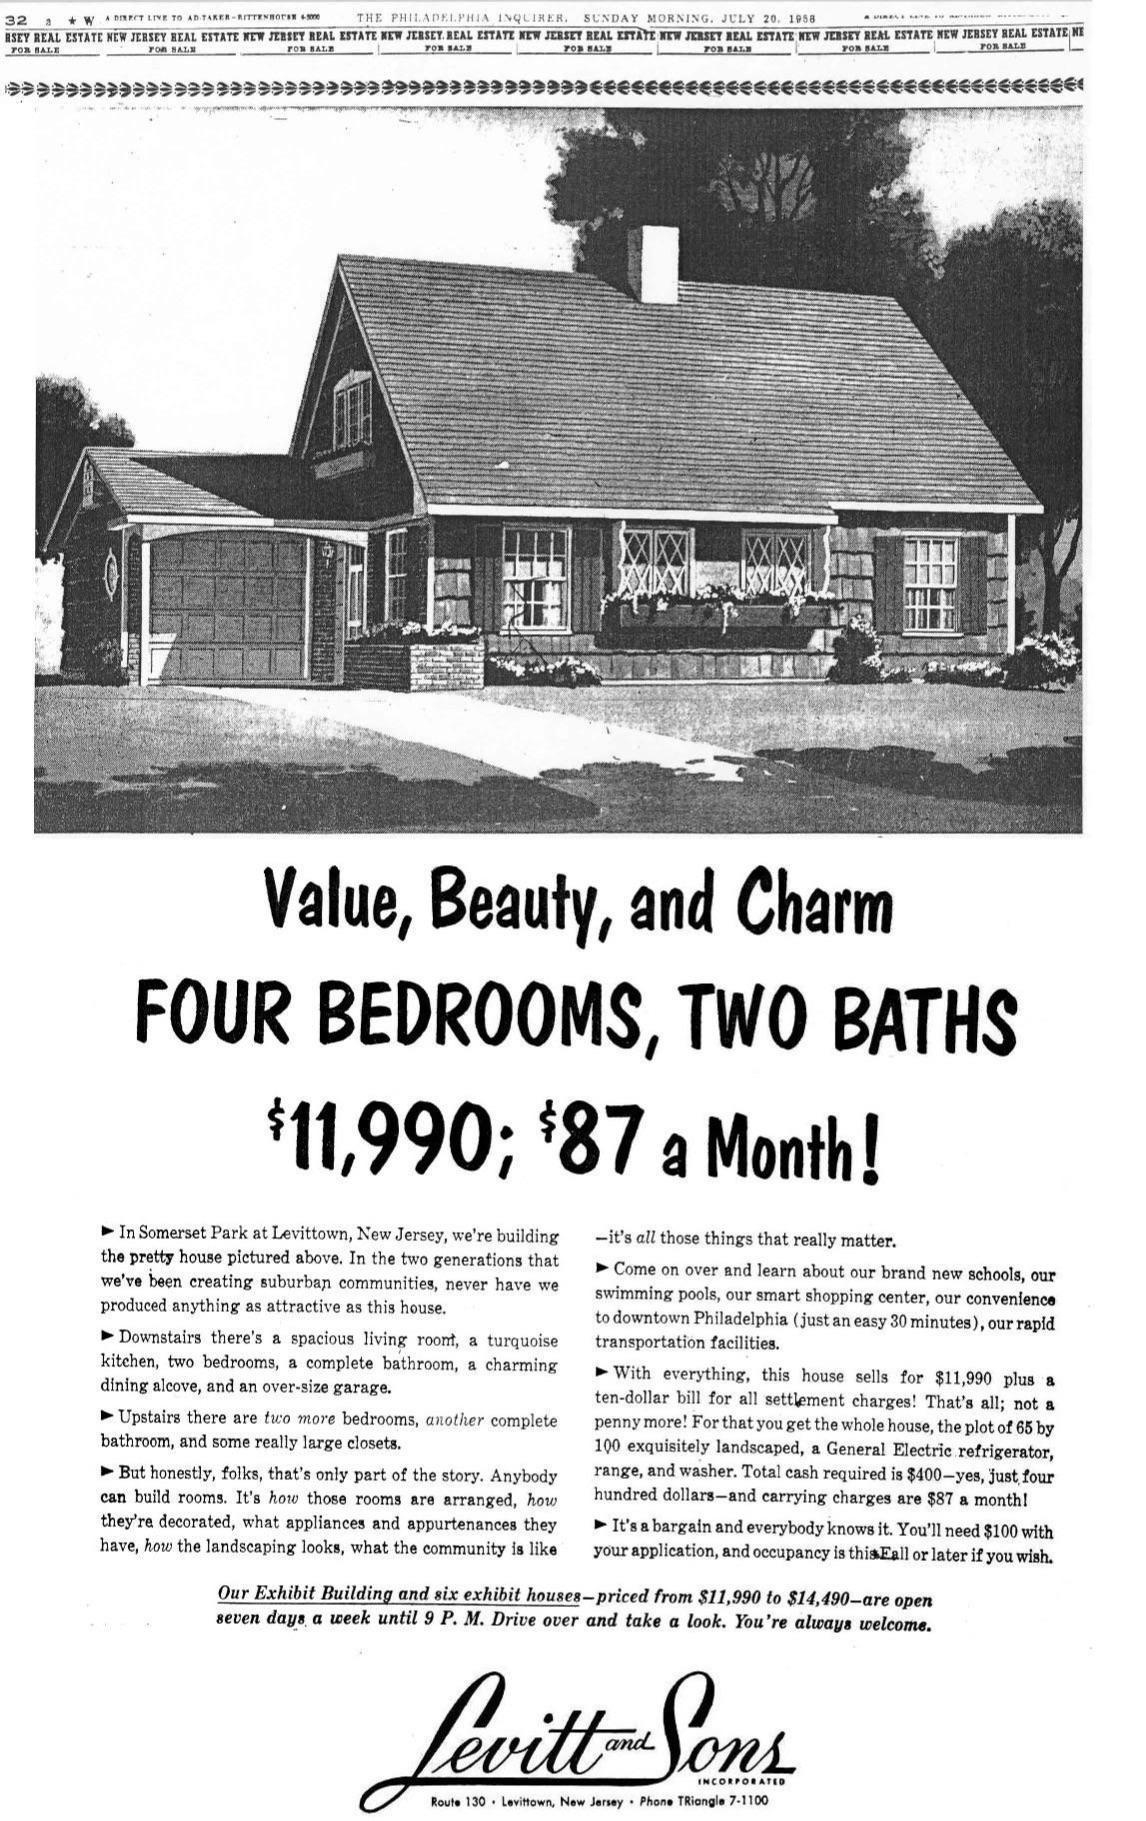 Ad for a 4-bedroom home in 1958